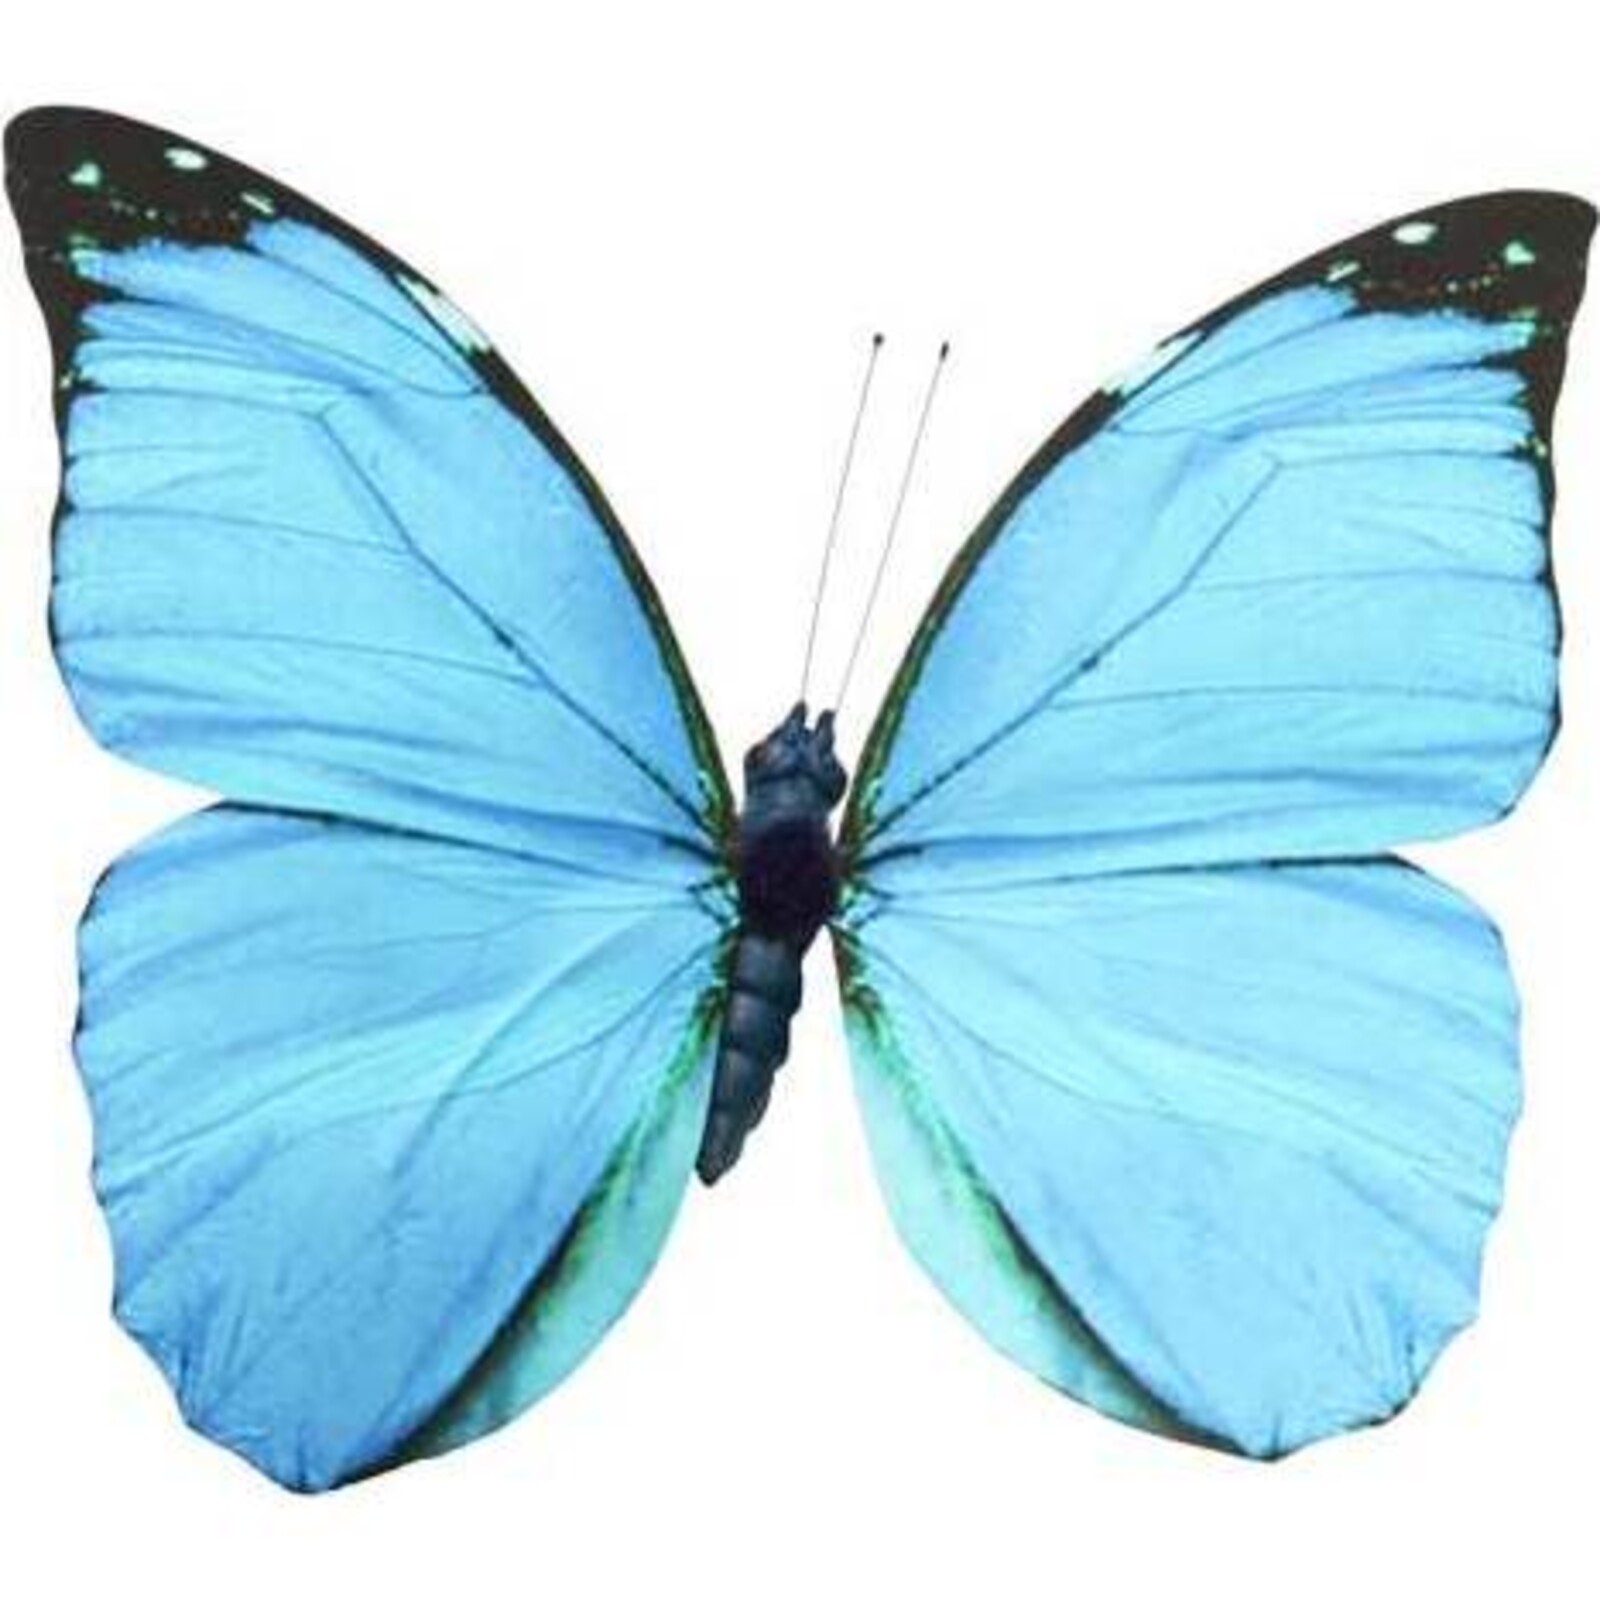  Butterfly Large - Bright Blue